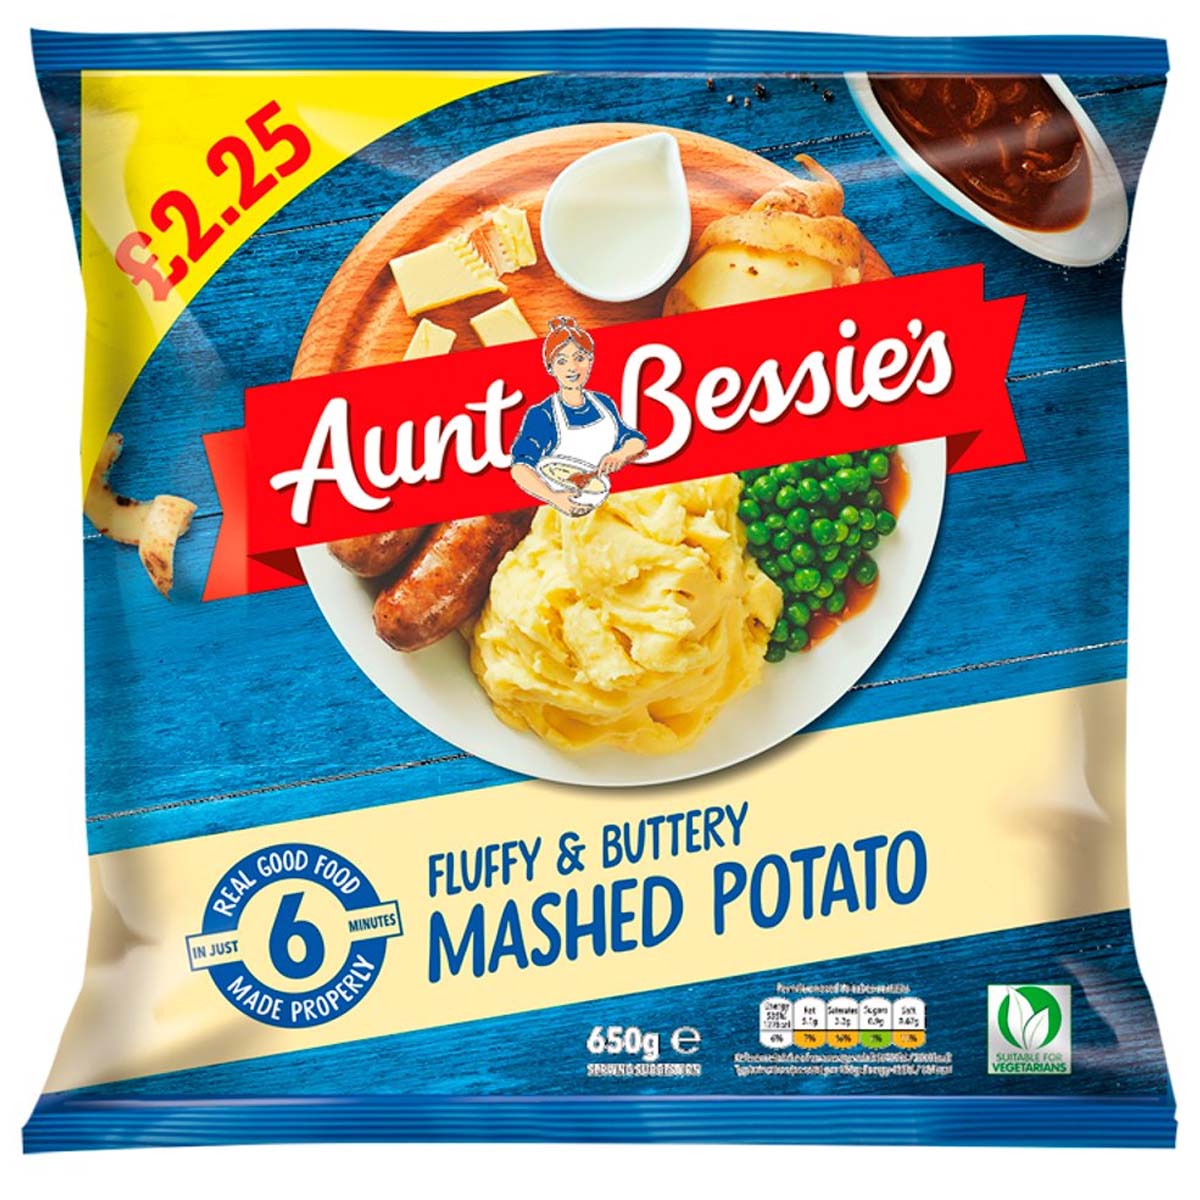 Aunt Bessie's - Fluffy & Buttery Mashed Potato - 650g - Continental Food Store